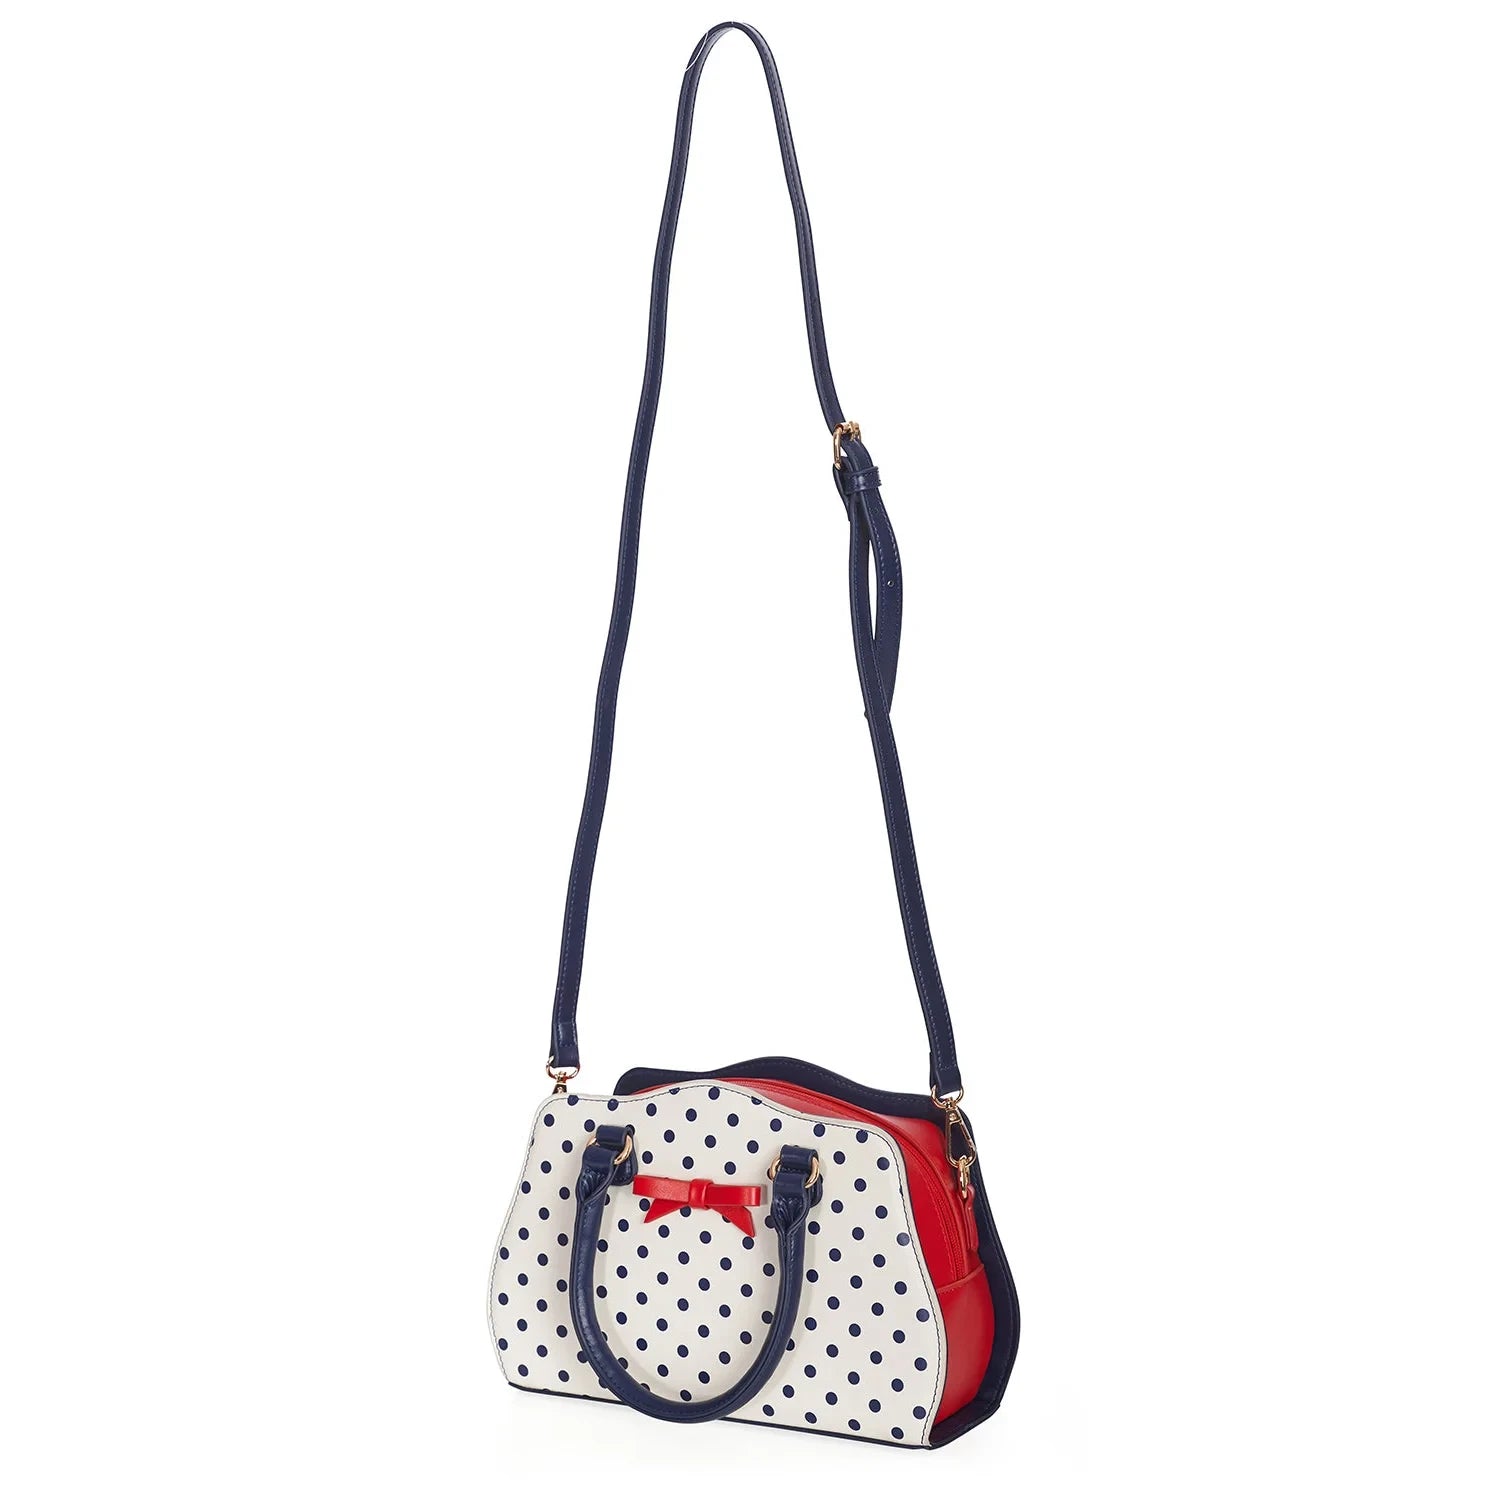 White and Navy Polka Dot Handbag with Red Bow detail